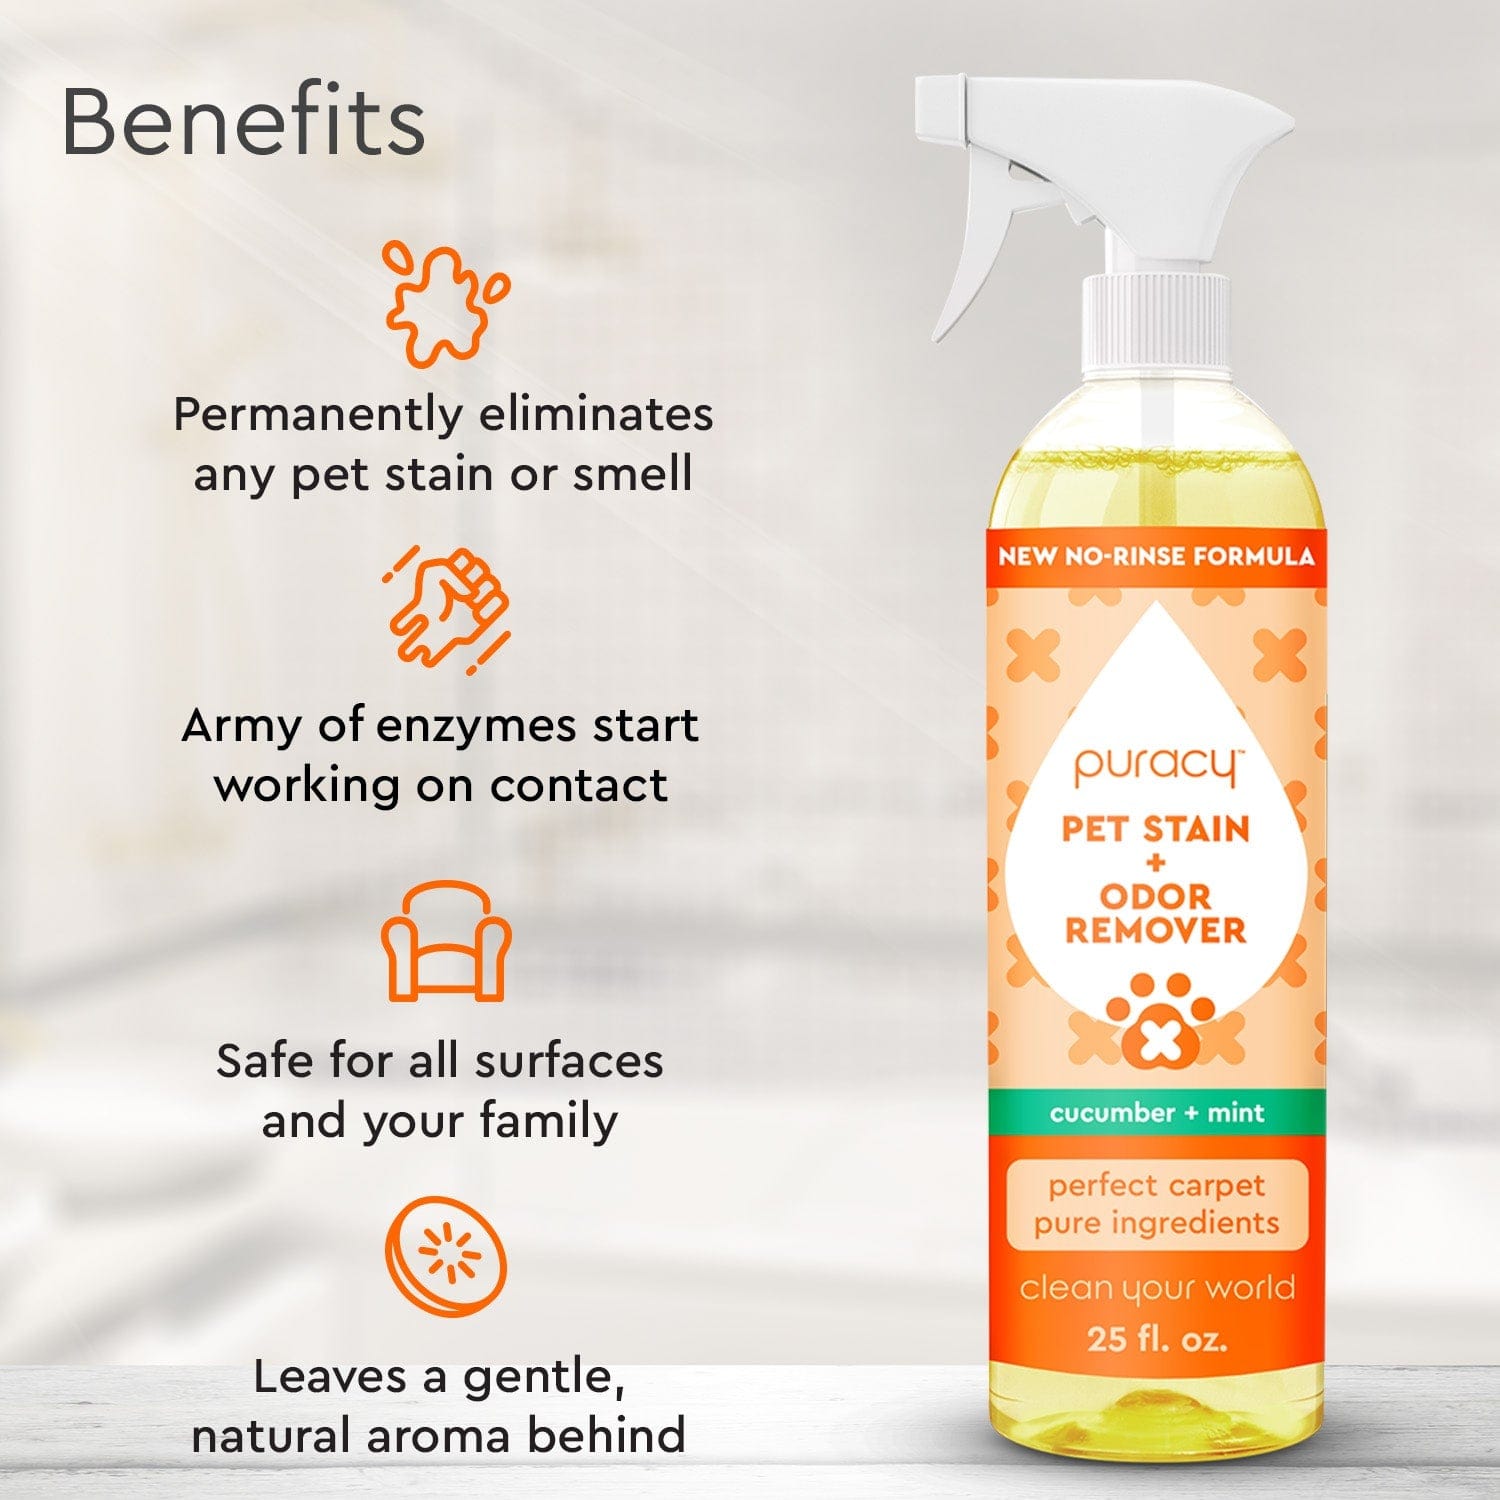 Benefits of Puracy Pet Stain & Odor Remover